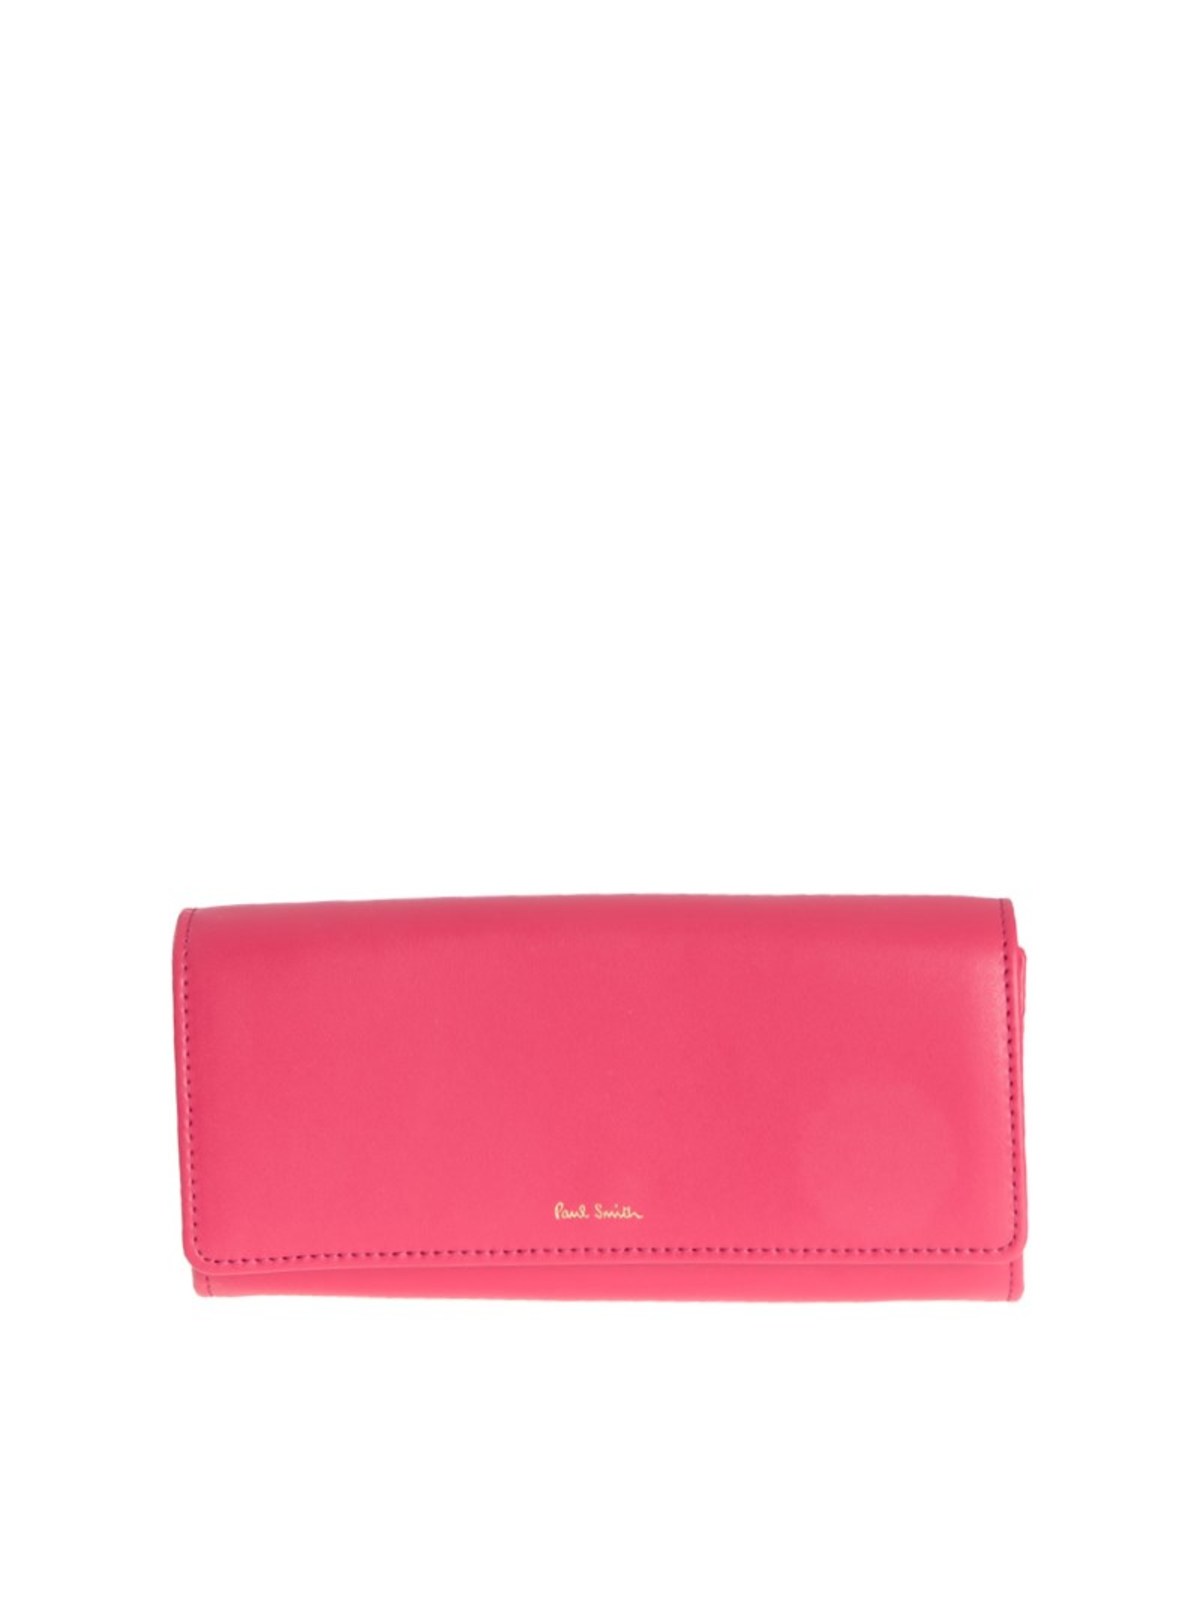 Paul Smith Leather Wallet In Fucsia